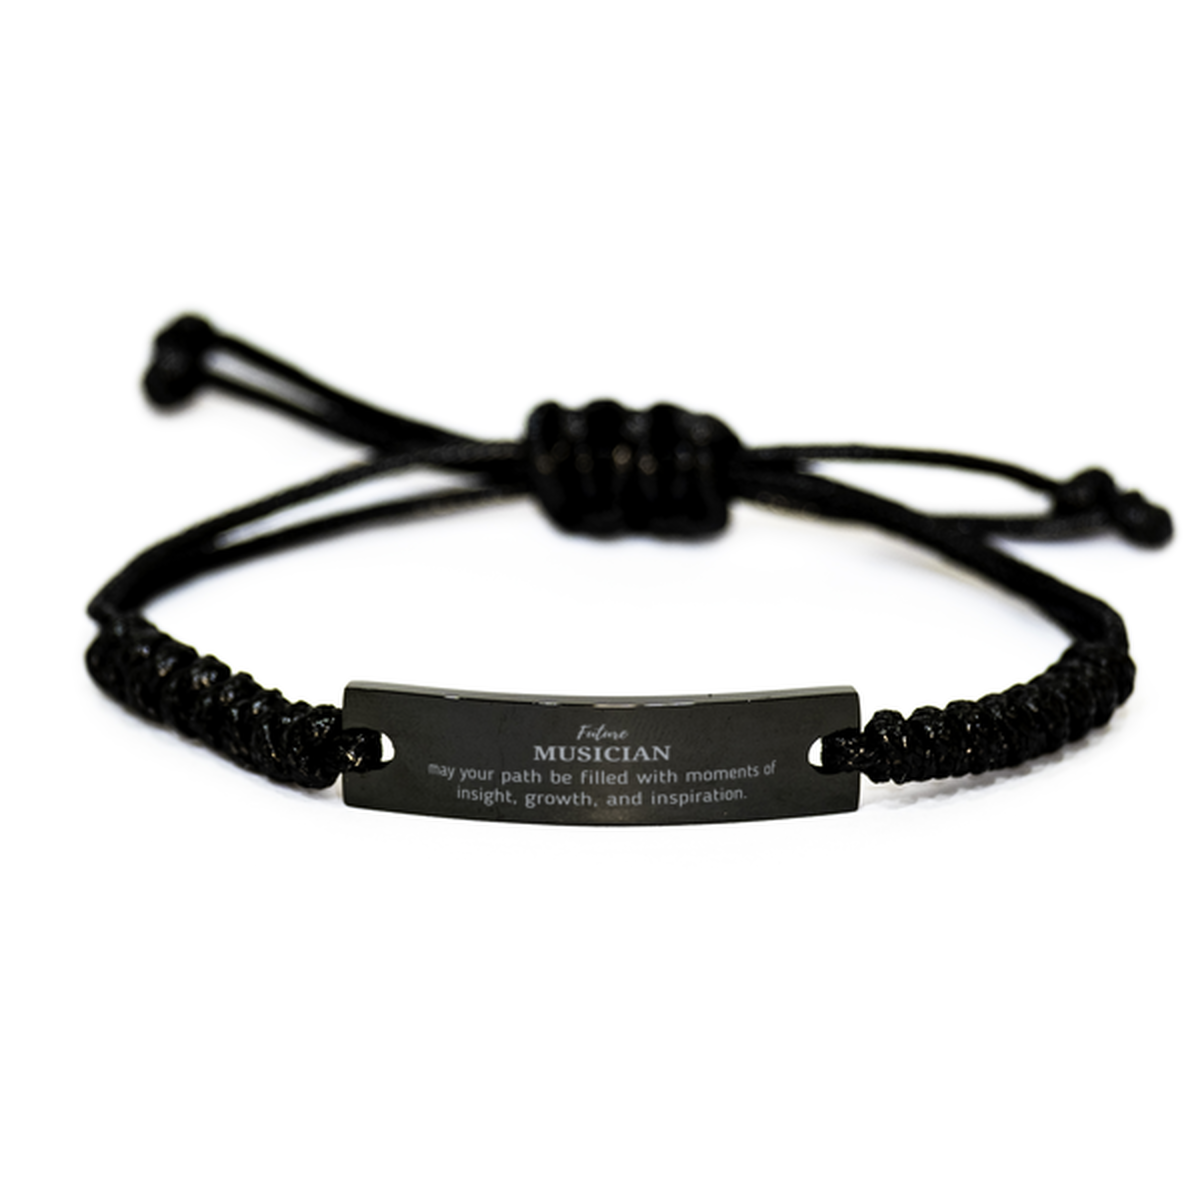 Future Musician Gifts, May your path be filled with moments of insight, Graduation Gifts for New Musician, Christmas Unique Black Rope Bracelet For Men, Women, Friends